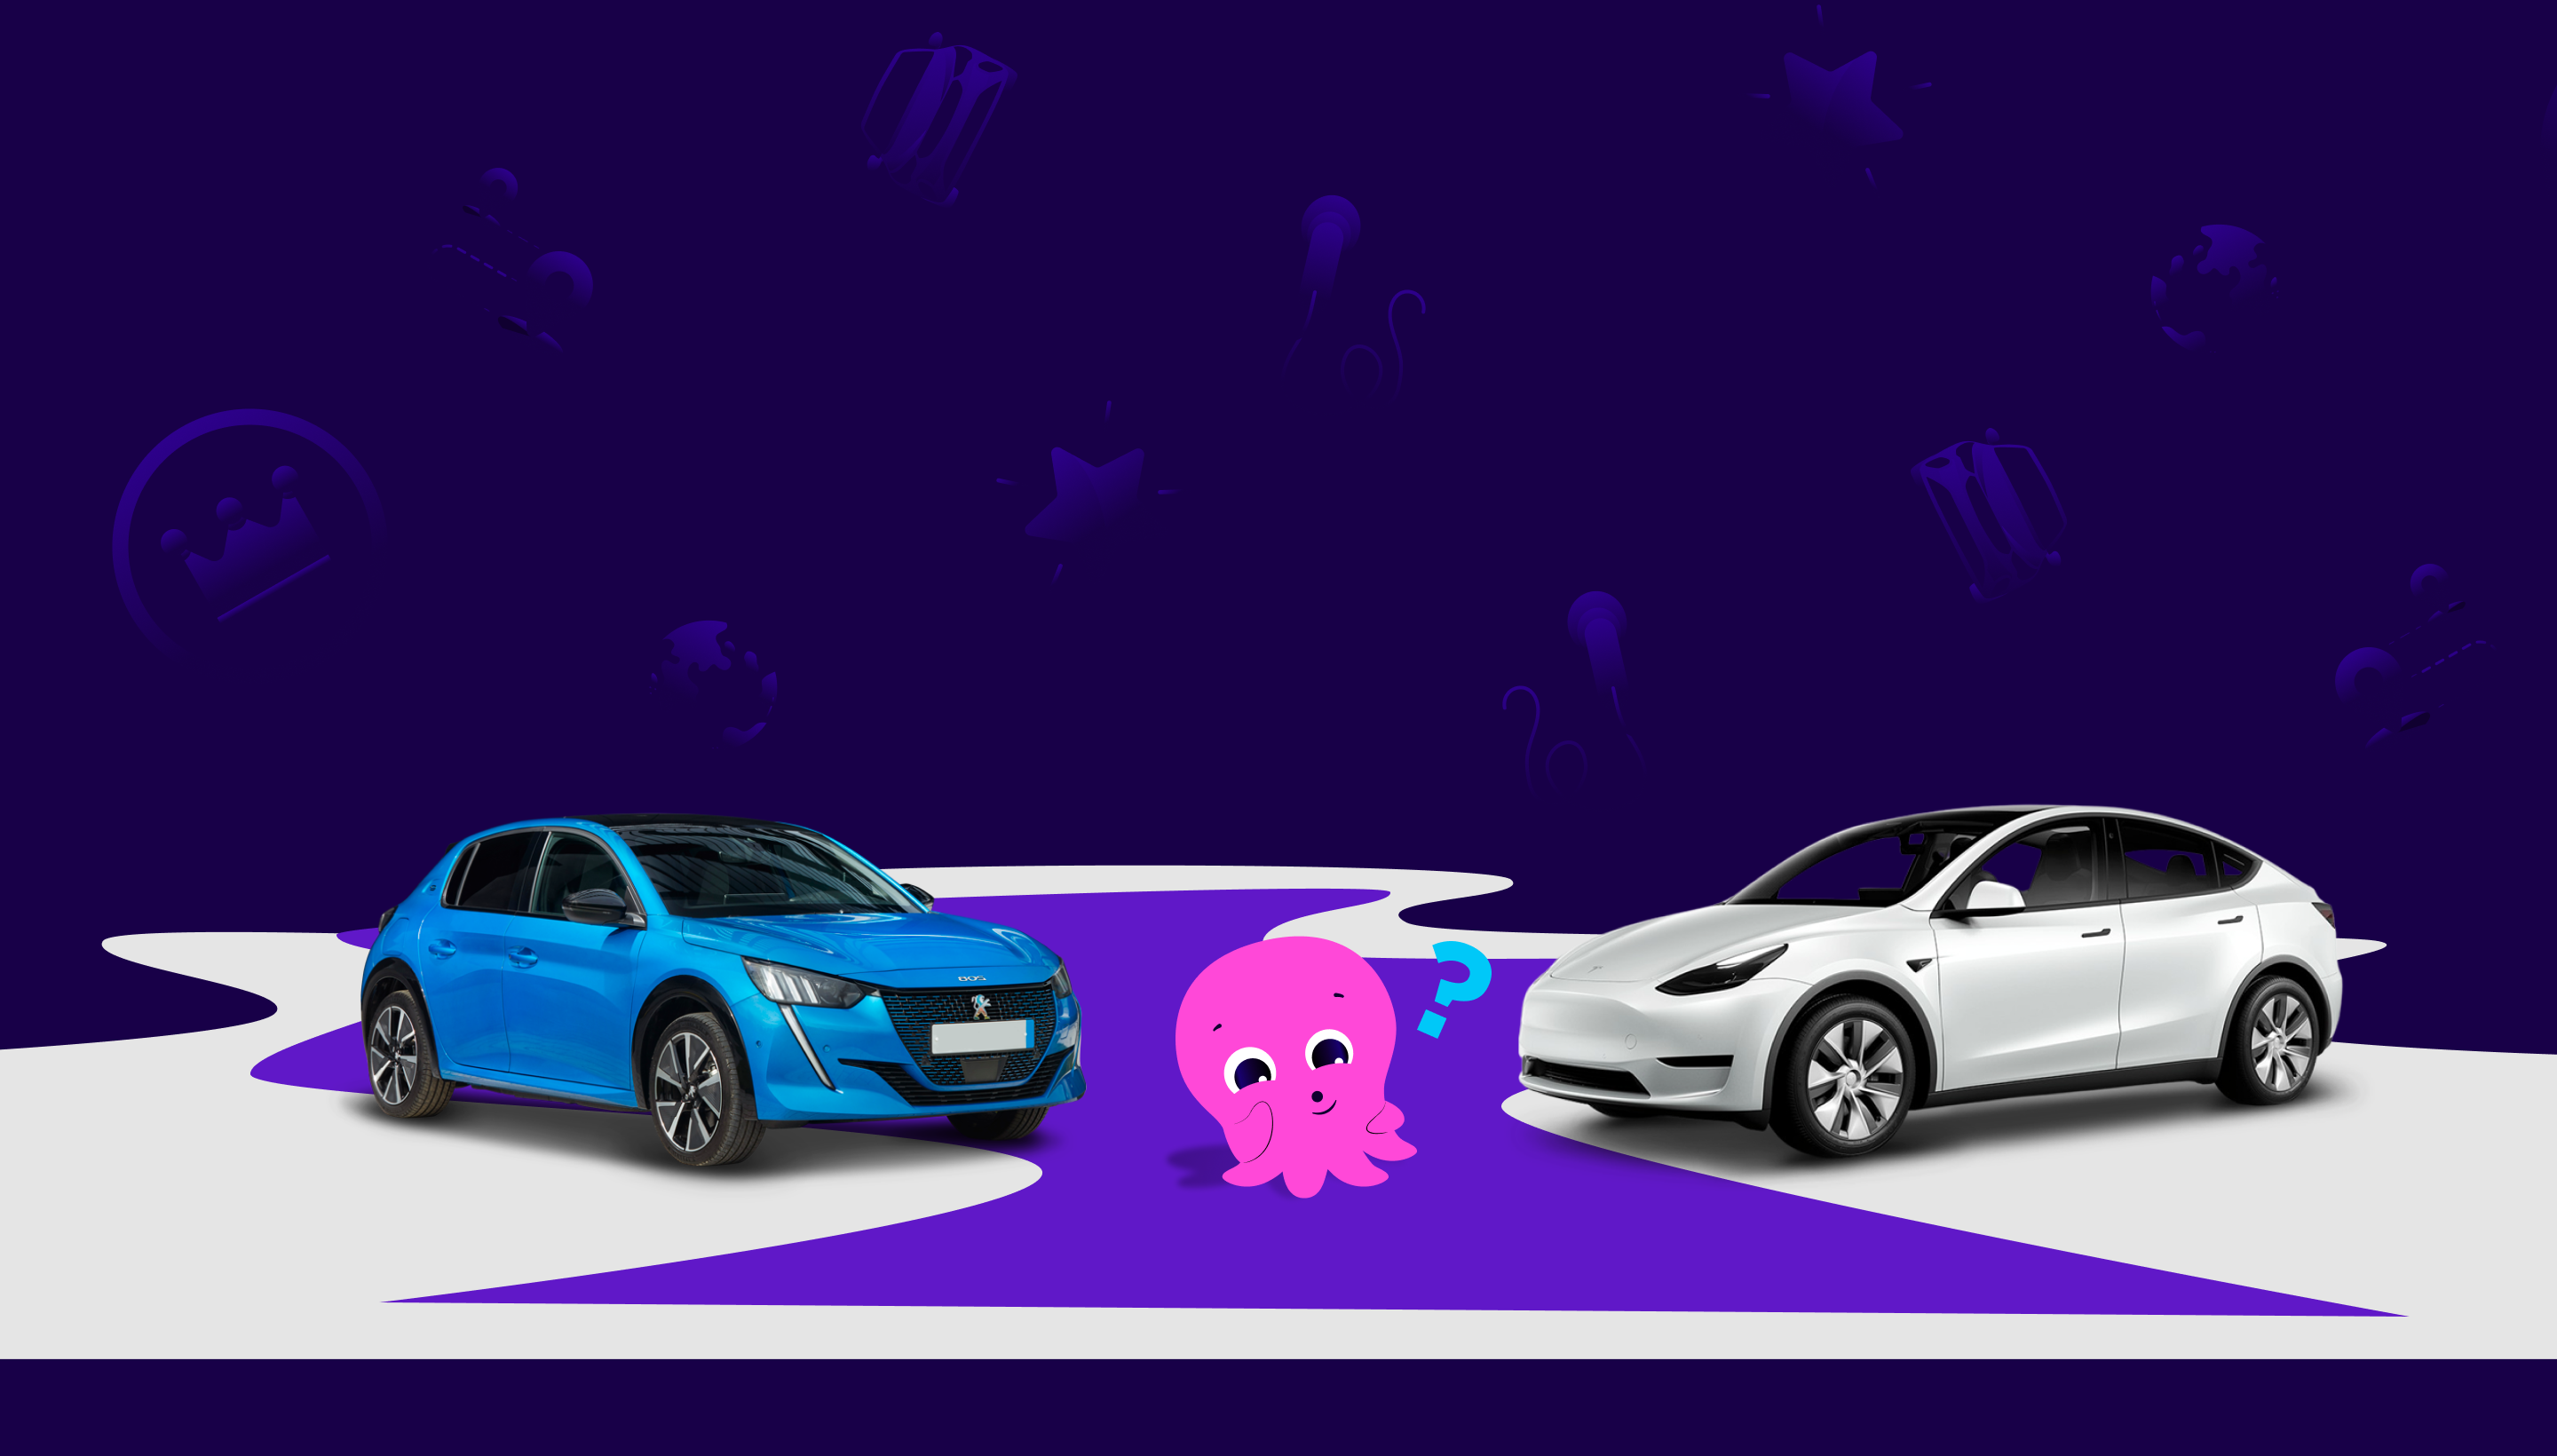 Pink Constantine standing between two electric vehicles one blue and one white with a blue question mark over his head and a blue purple squiggle in front of him with a dark blue background